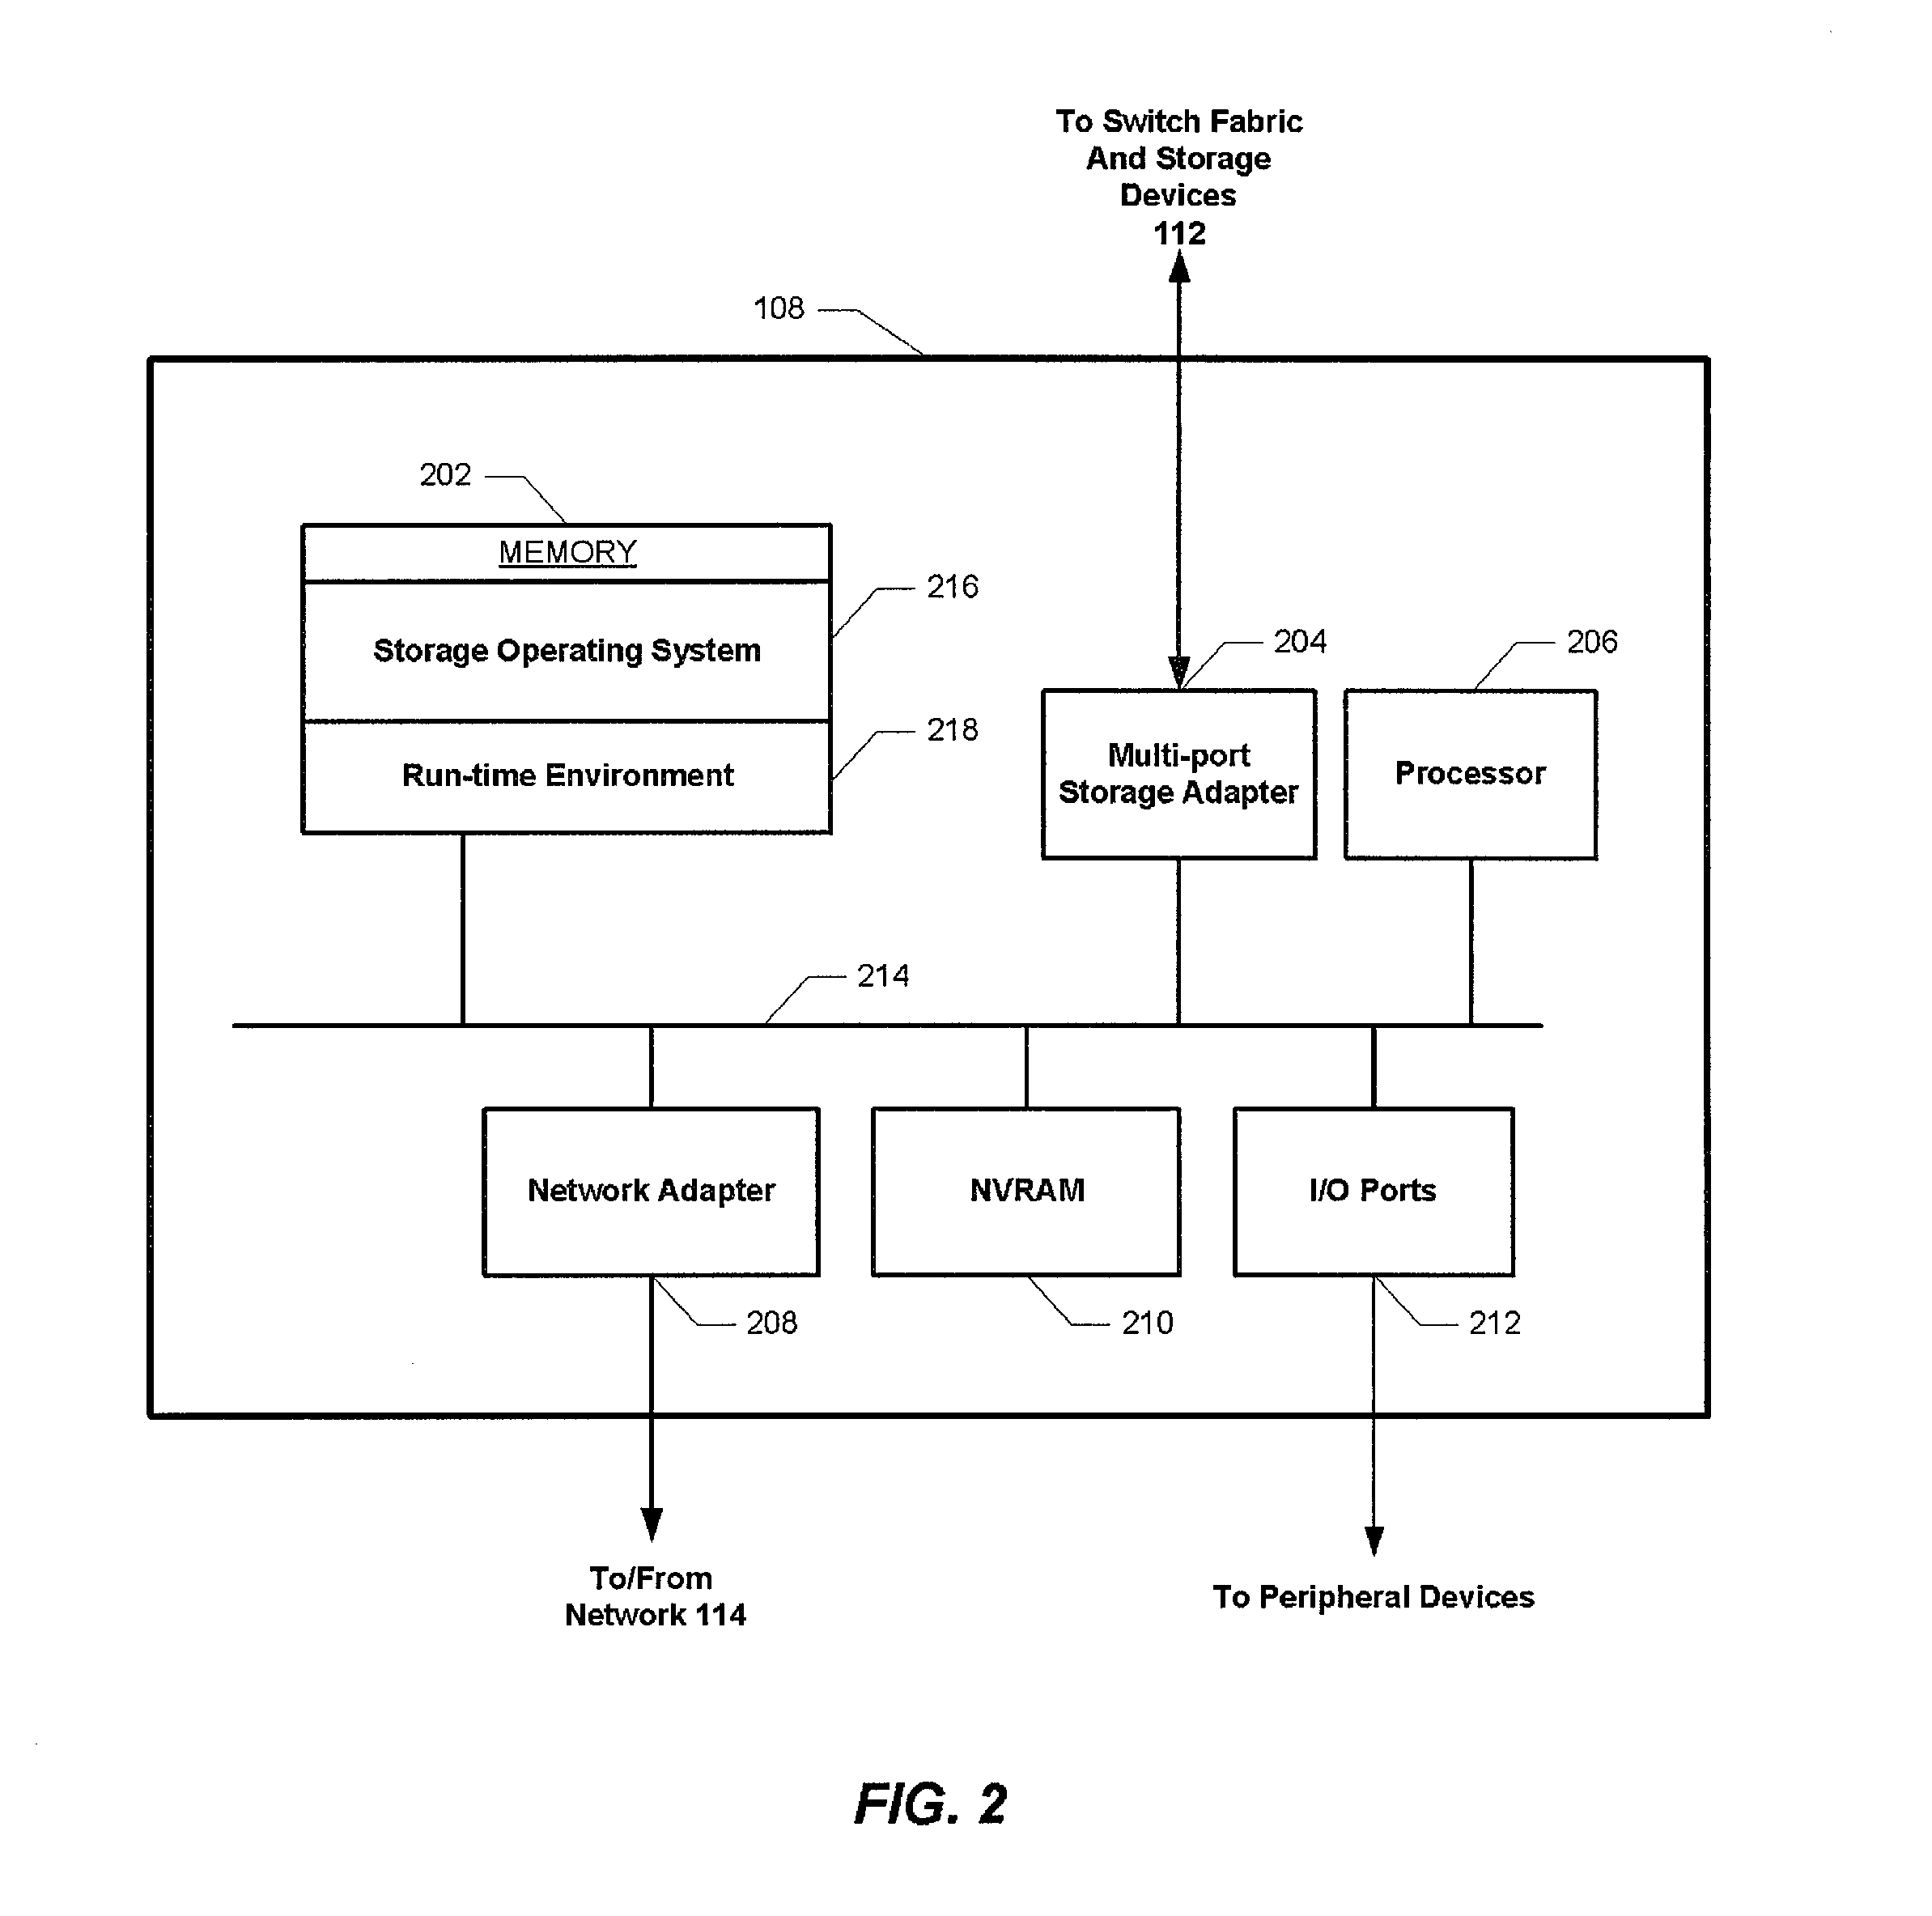 Event suppression method and system